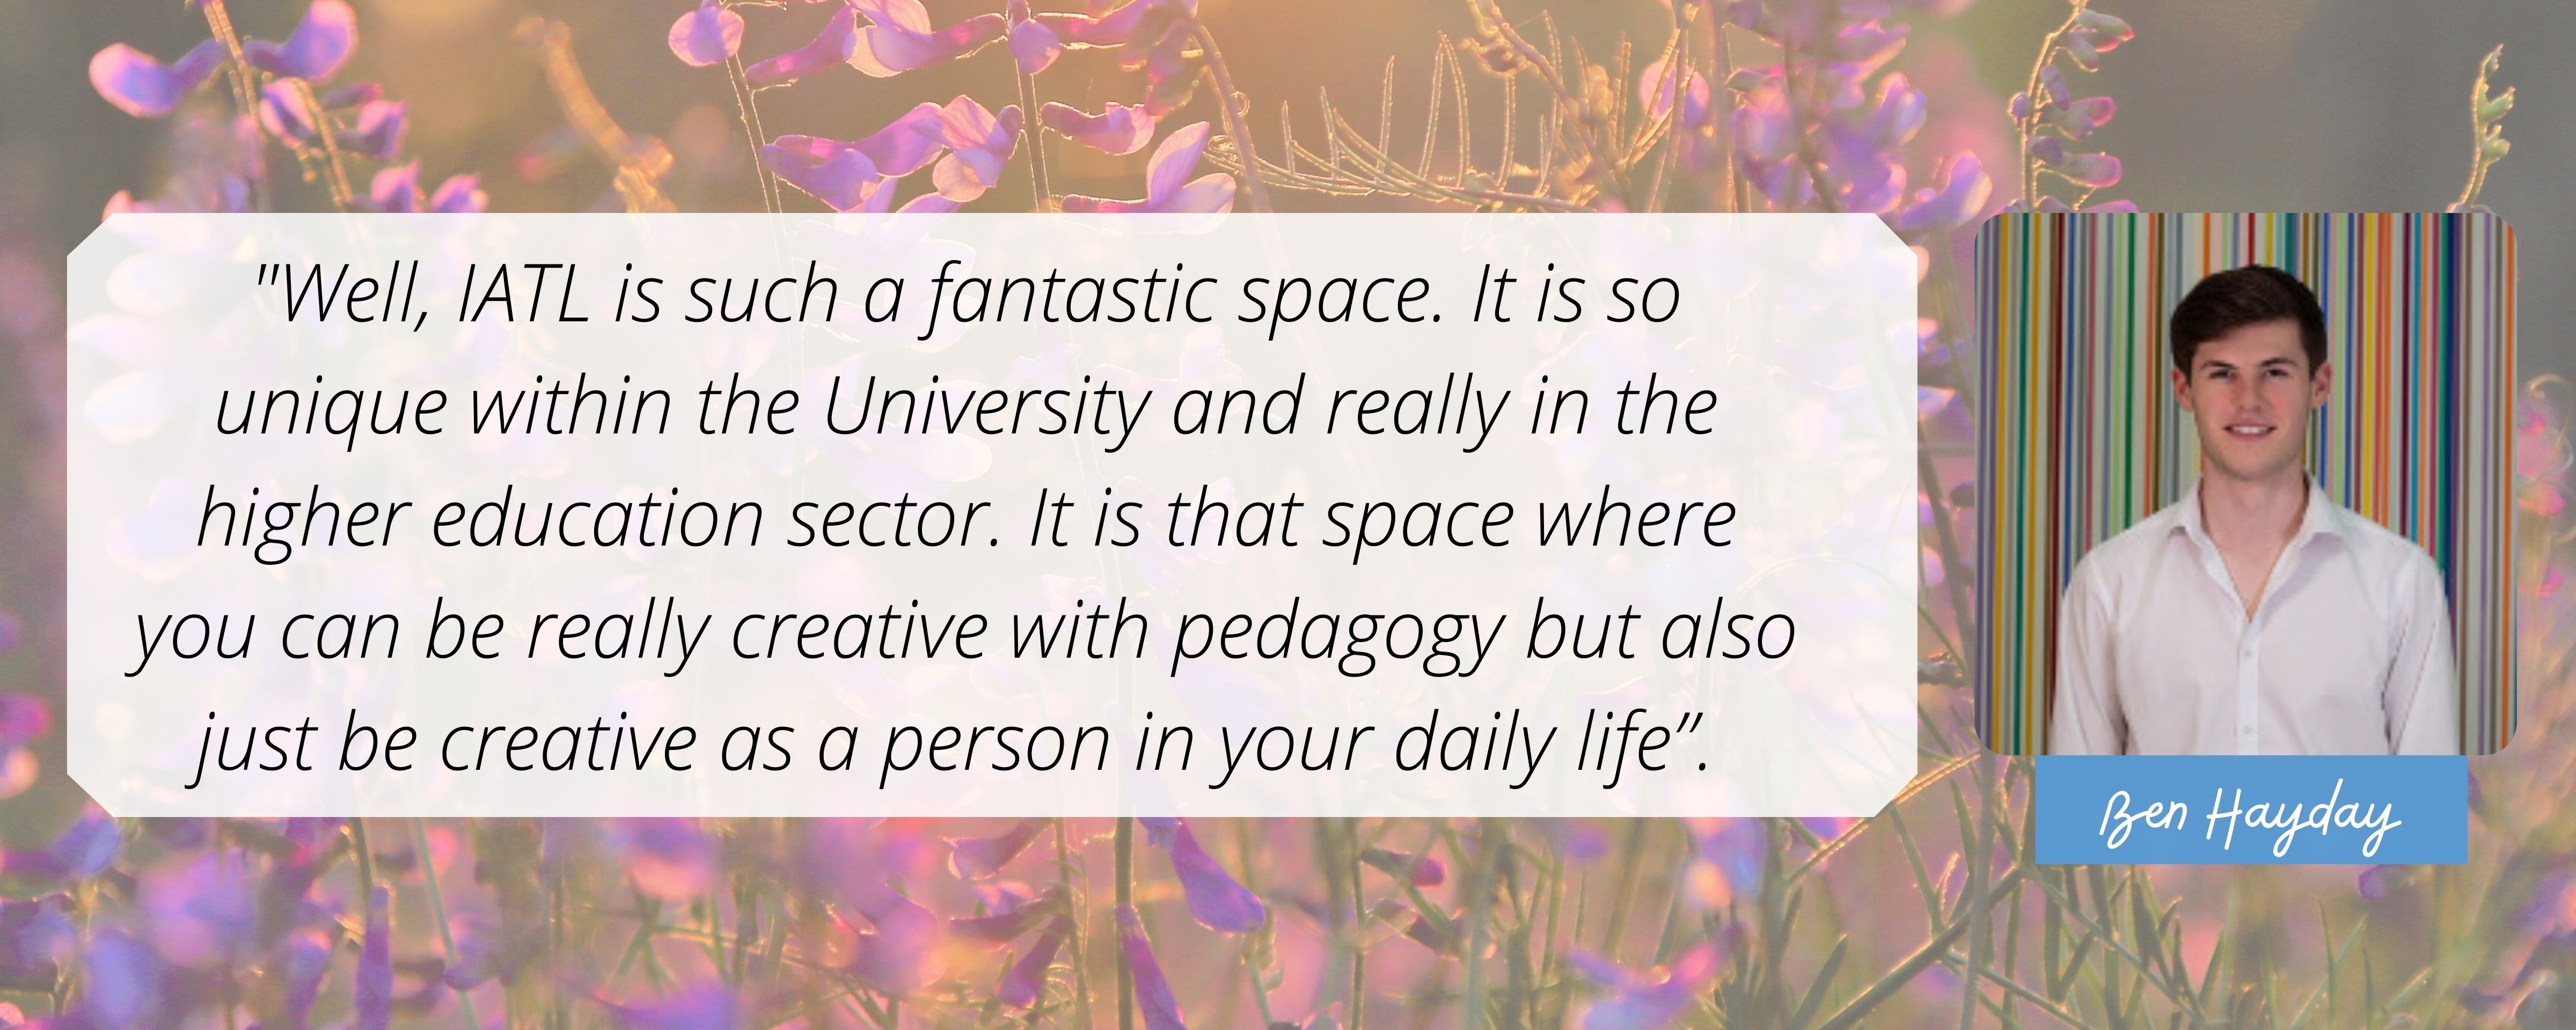 Well, IATL is such a fantastic space. It is so unique within the University and really in the higher education sector. It is that space where you can be really creative with pedagogy but also just be creative as a person in your daily life